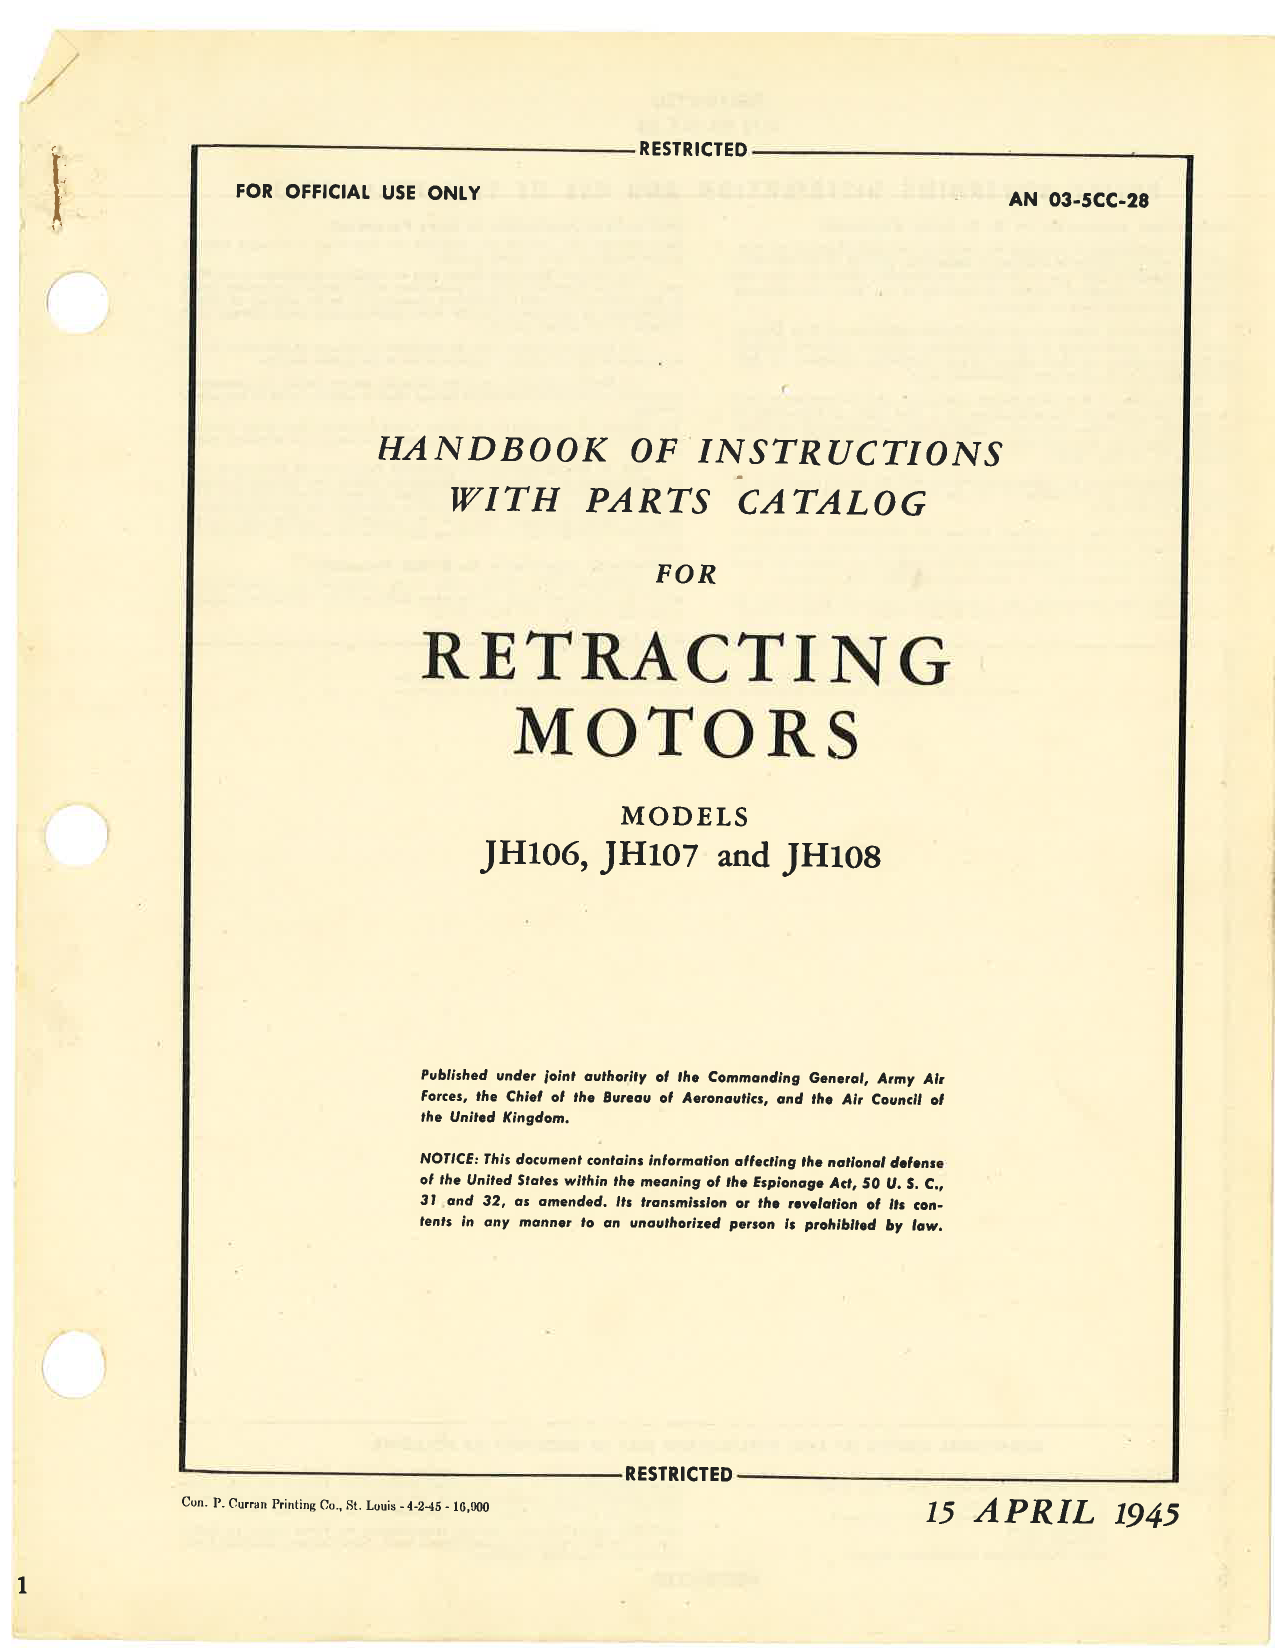 Sample page 1 from AirCorps Library document: Handbook of Instructions with Parts Catalog for Retracting Motors Models JH106, JH107, and JH108